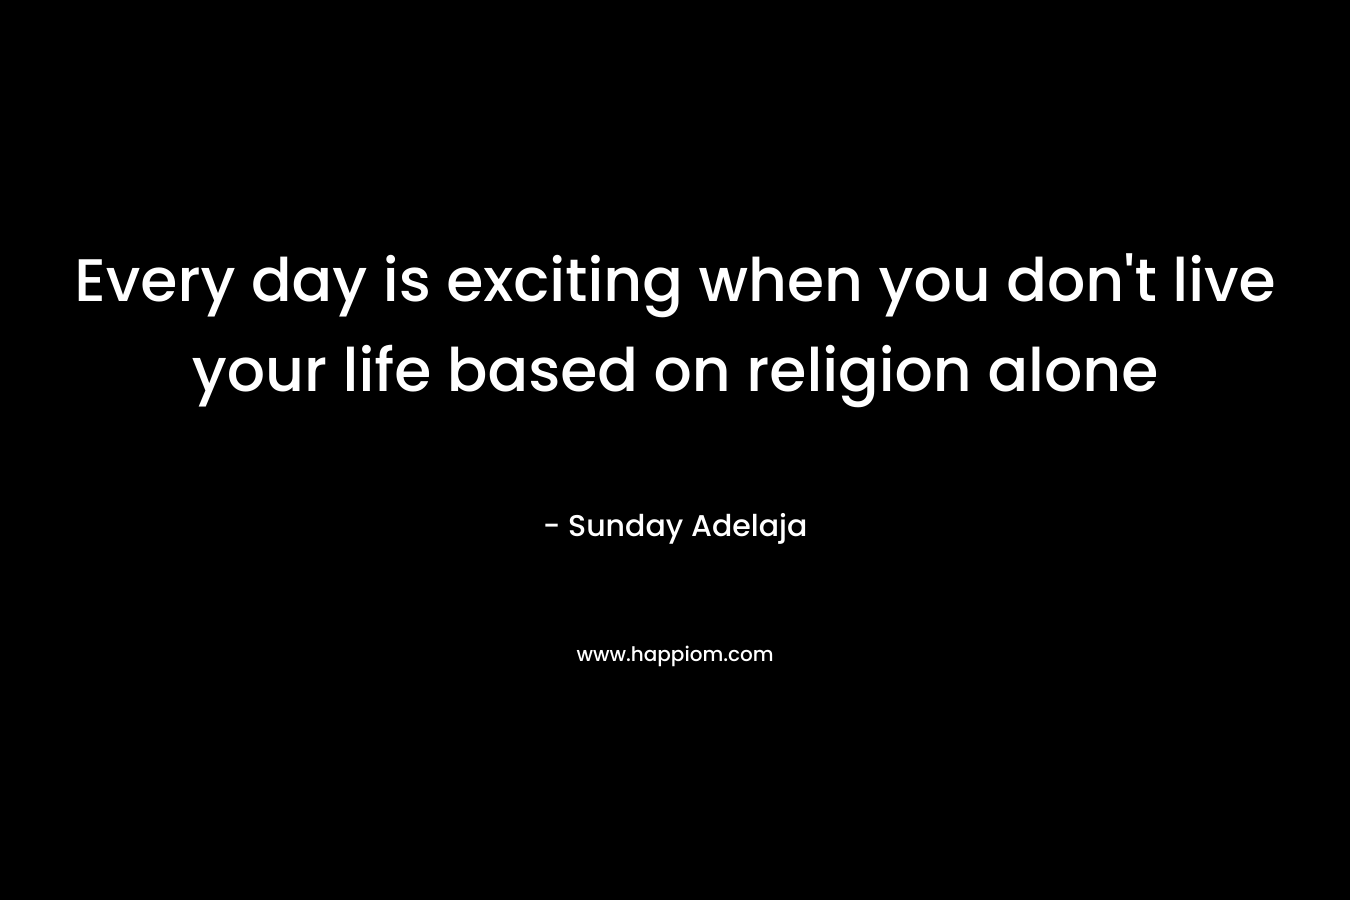 Every day is exciting when you don't live your life based on religion alone